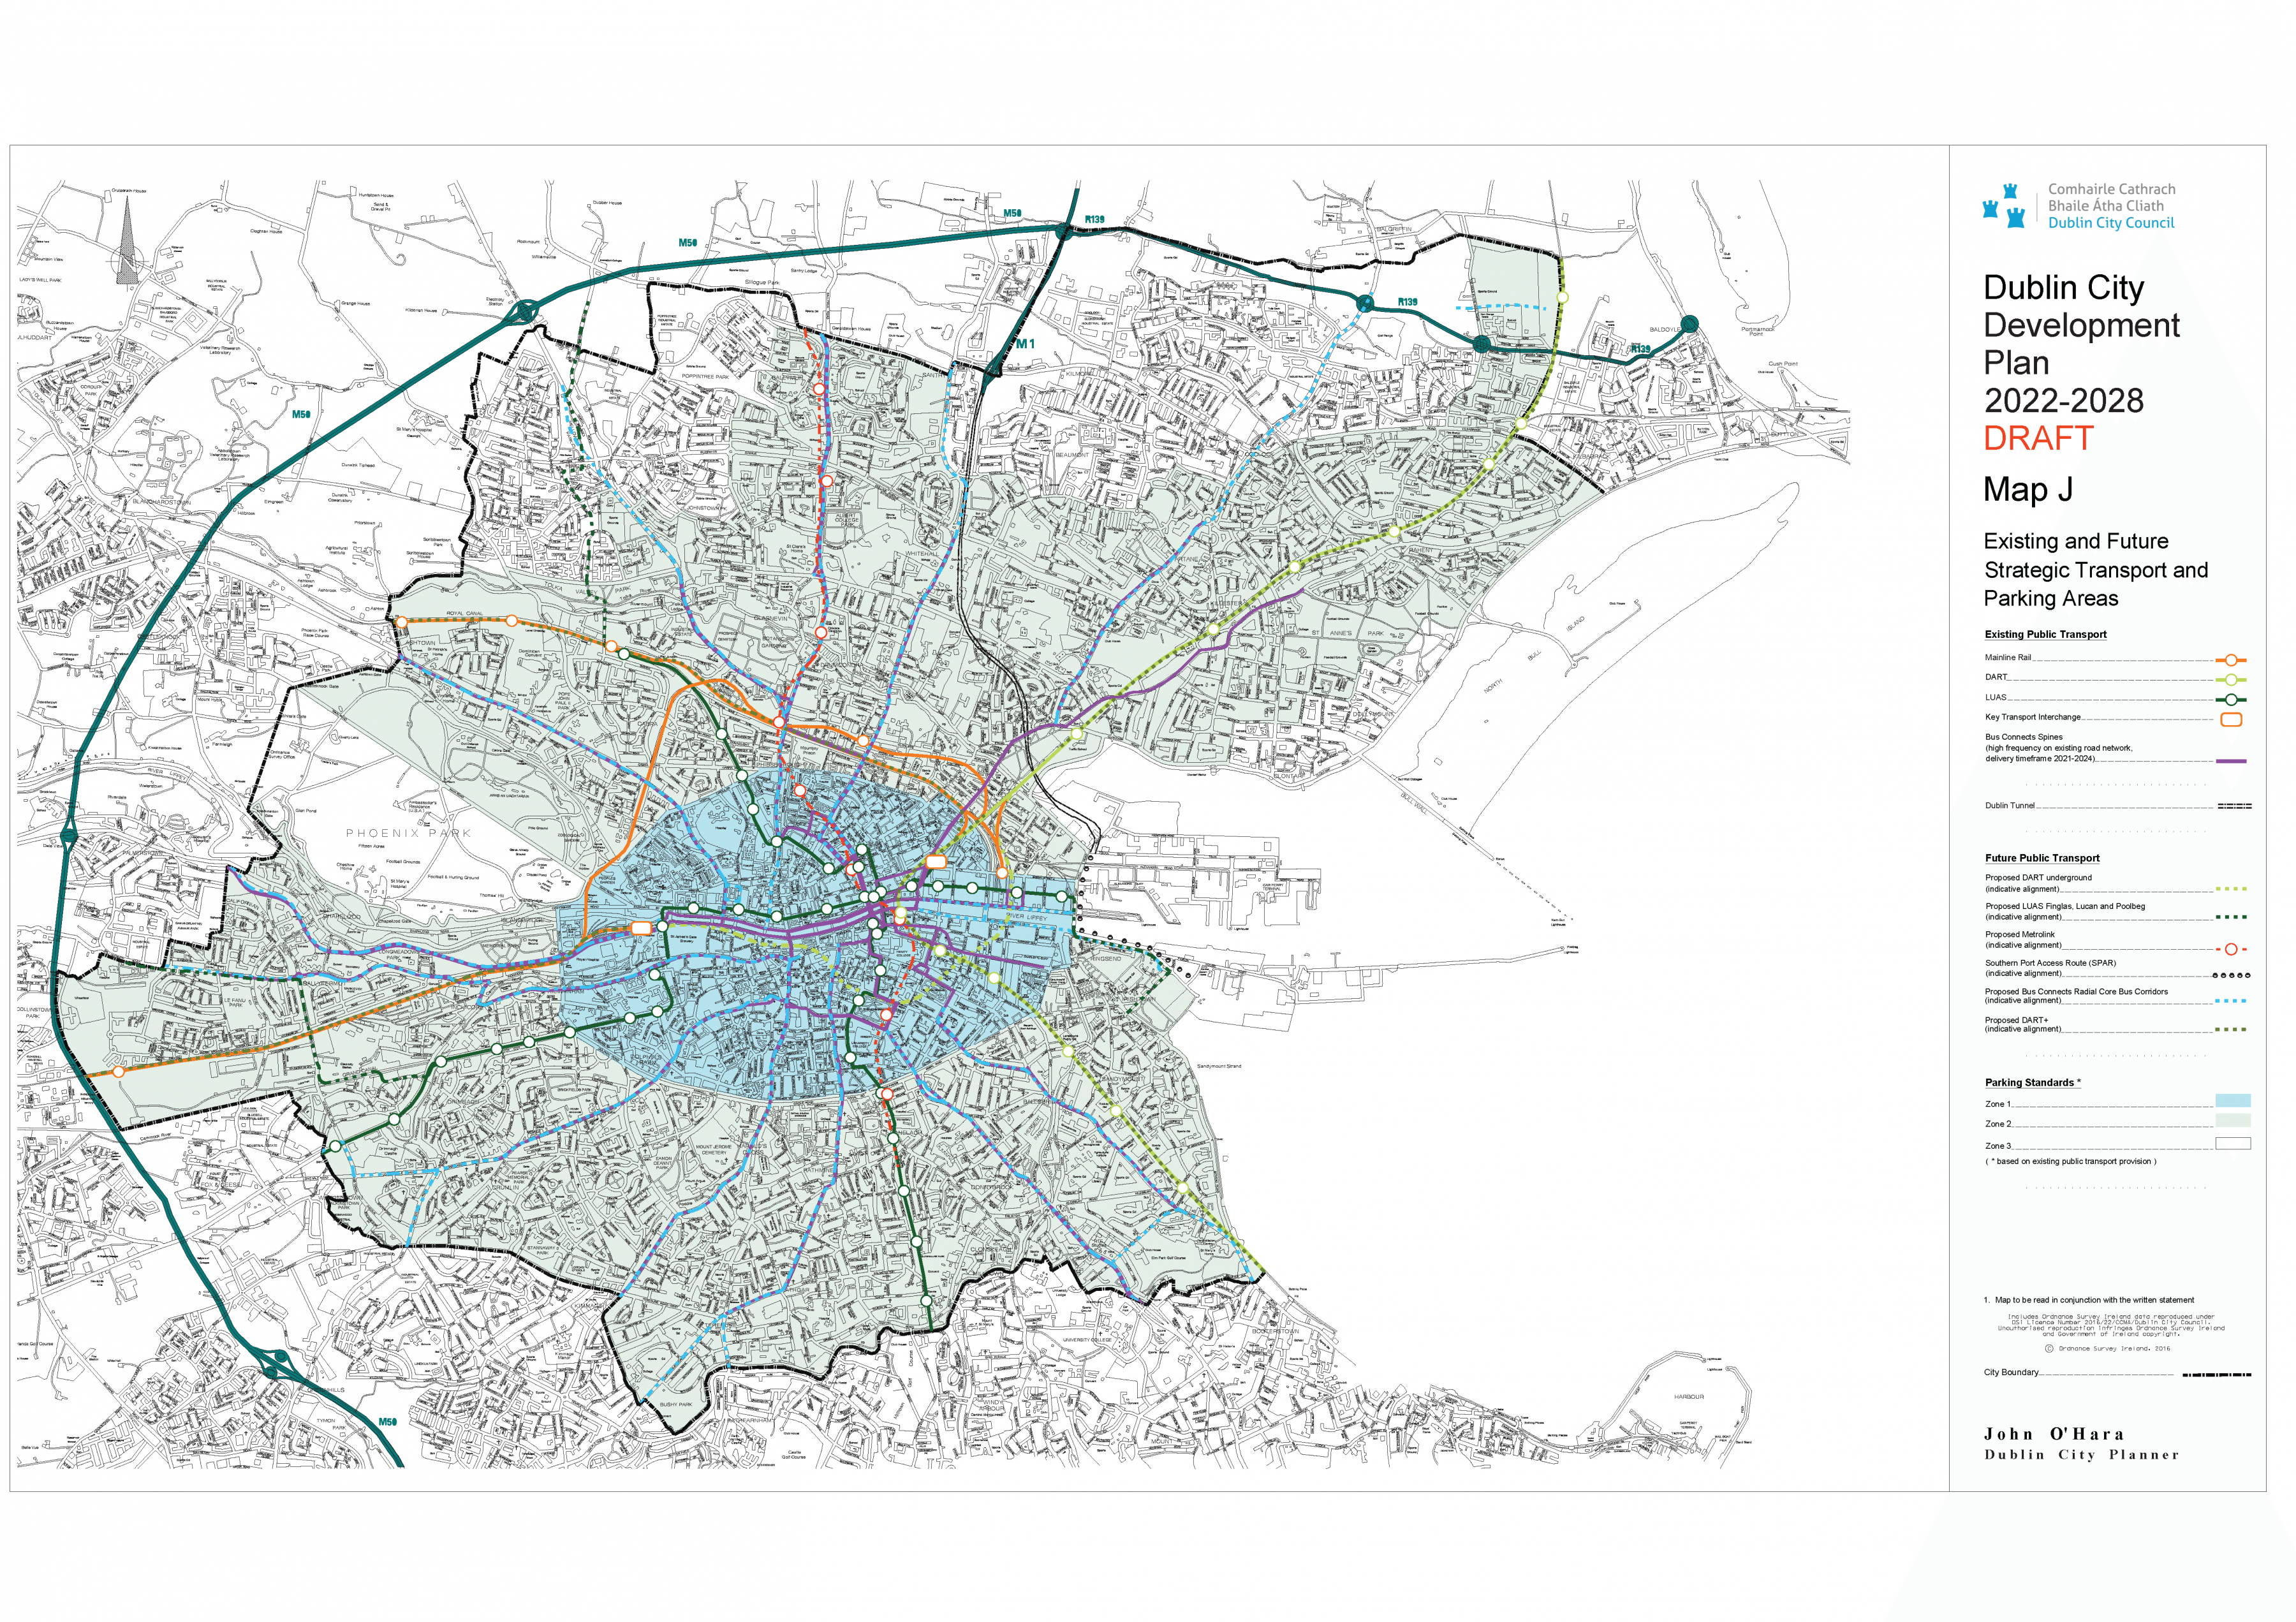 Map J Existing and Future Strategic Transport and Parking Areas